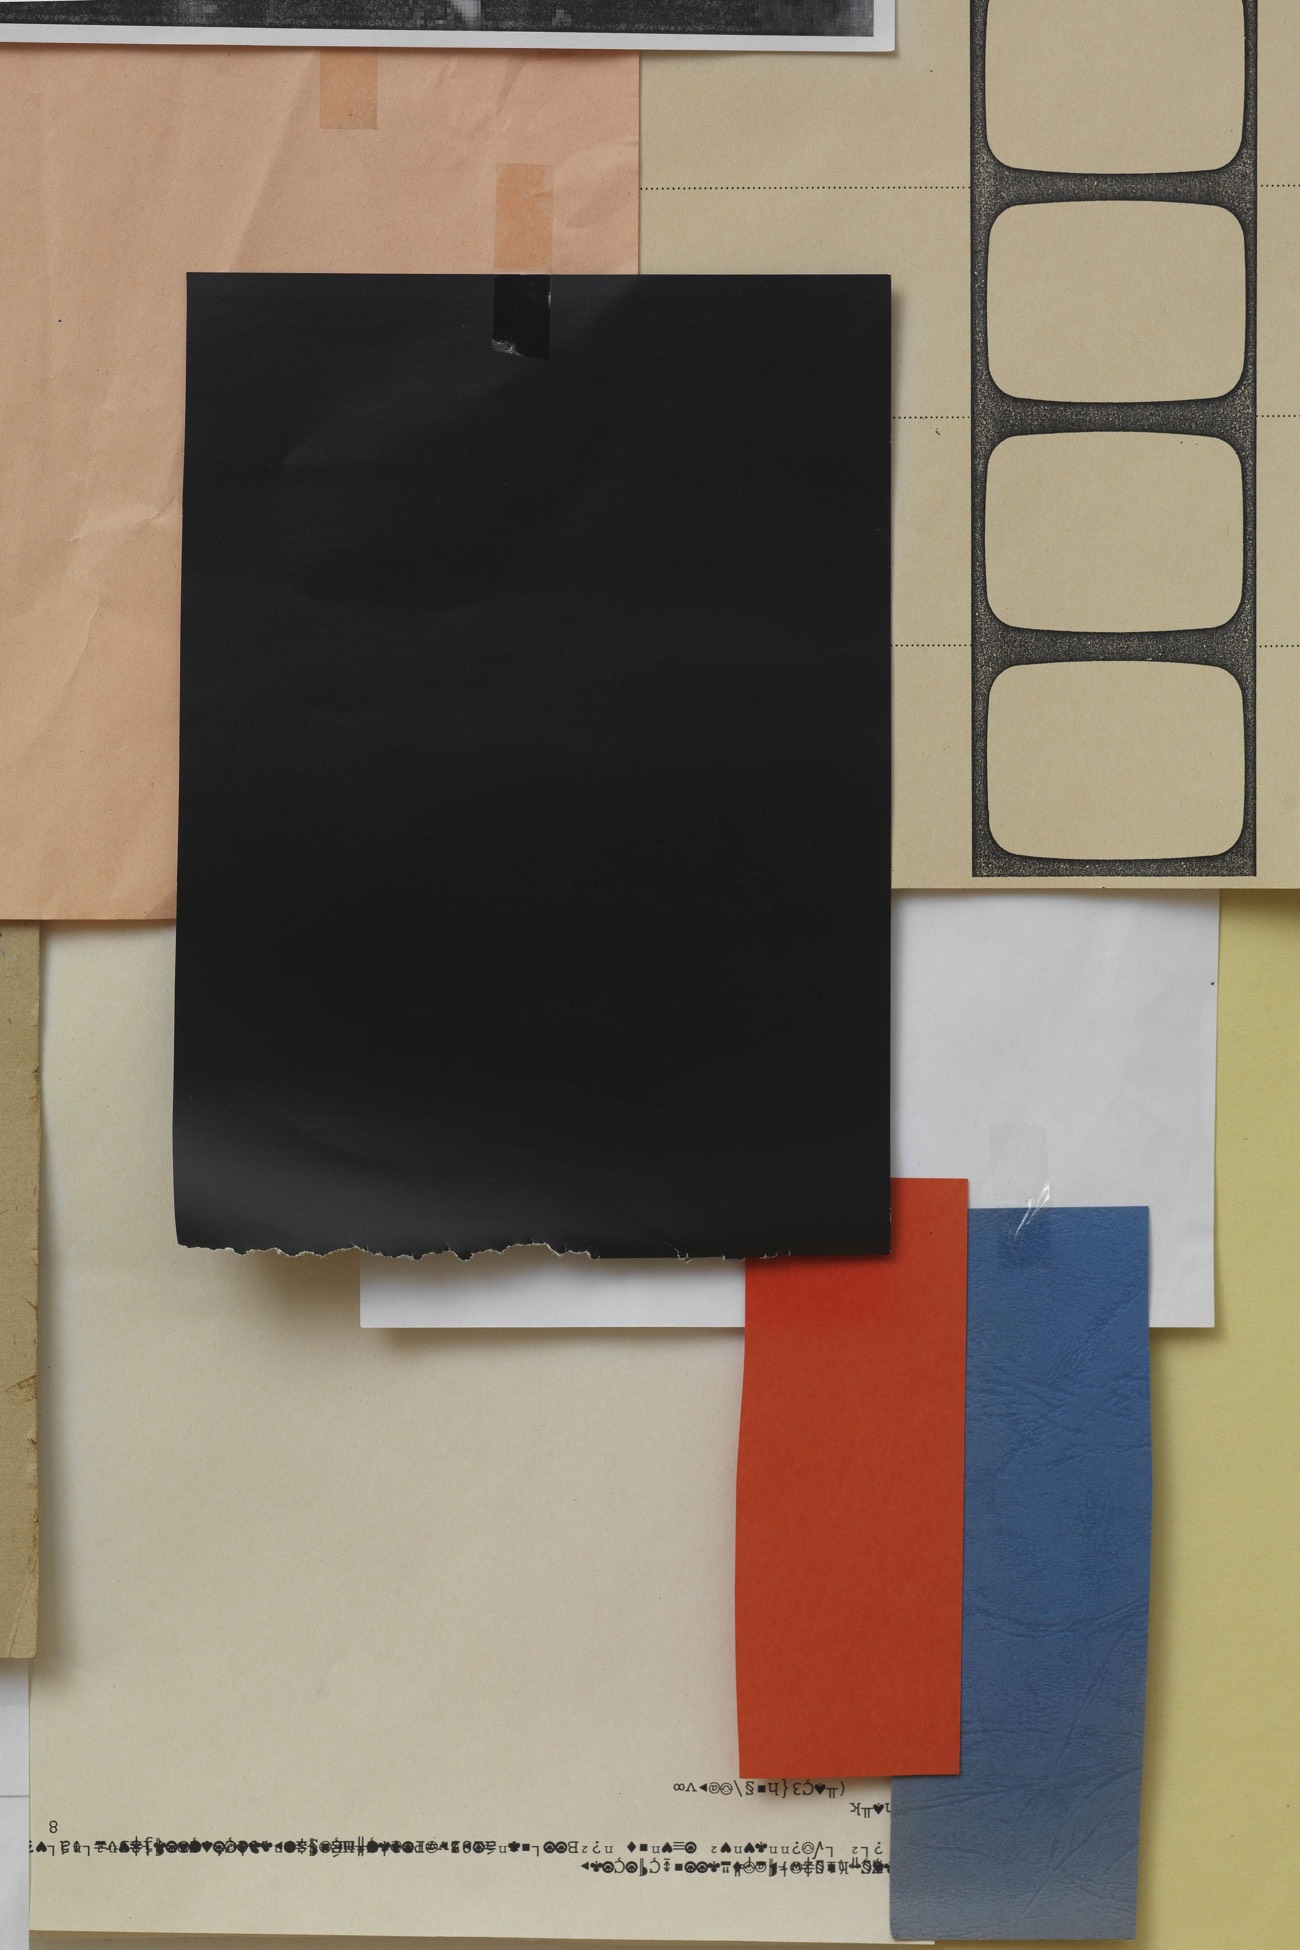 Colored papers: Rosa, Rot, Blau, 2012